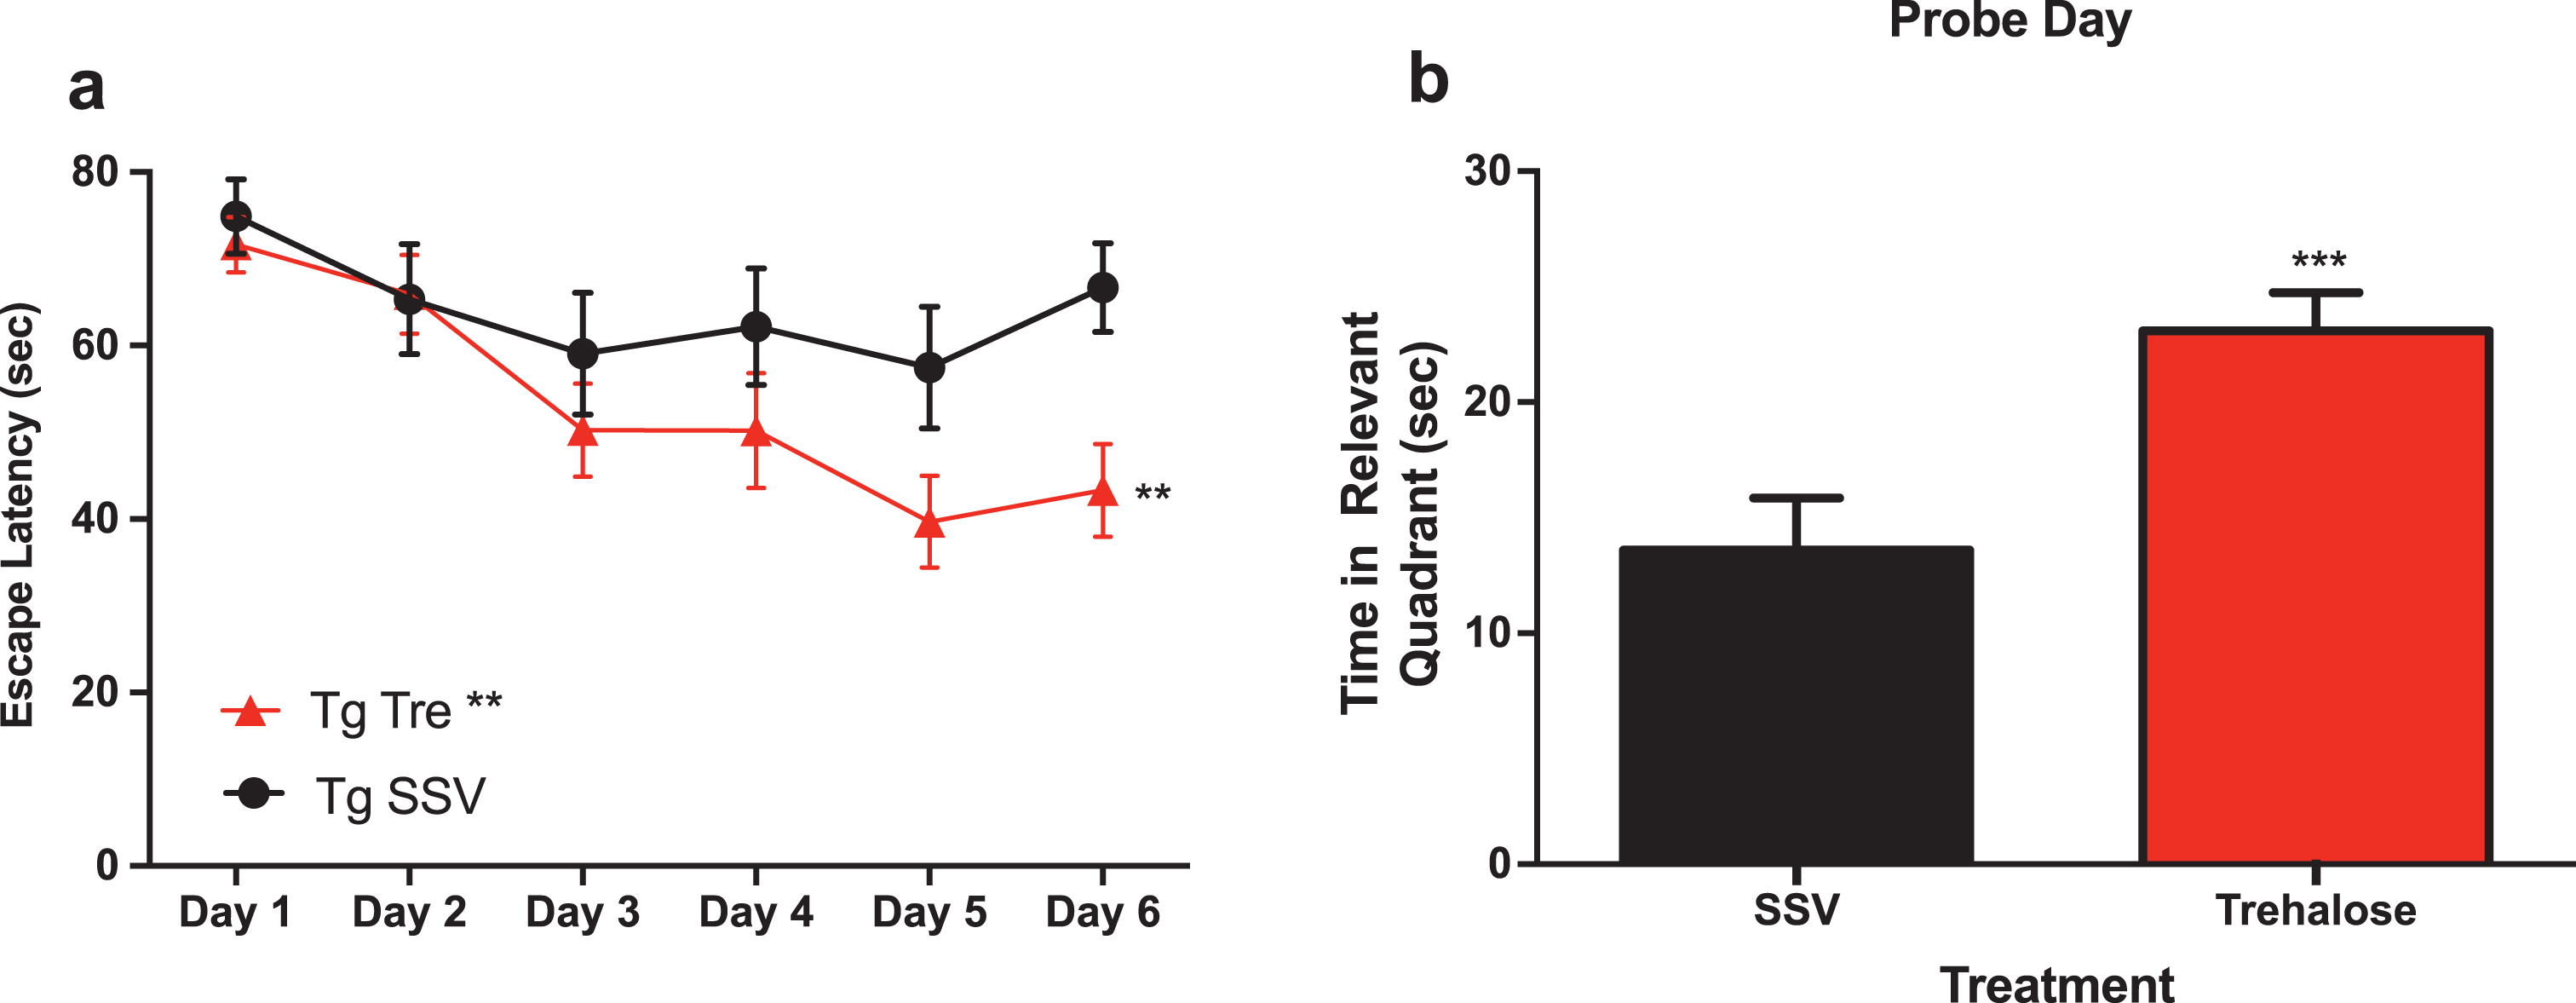 Trehalose treatment improves cognitive performance of Tg2576 mice in the Morris water maze. Two-way repeated measures ANOVA (++p < 0.0081) revealed a significant decrease in escape latency for Tg2576 trehalose treated mice compared to Tg2576 SSV treated litter mate controls over the course of the trial (Fig. 1a). A Bonferroni’s post-hoc analysis further revealed a significant decrease in latency for trehalose treated mice on day six (*p = 0.0233). Two-tailed t-test revealed a significant (***p < 0.0003) increase in time spent in the relevant quadrant for trehalose treated Tg2576 mice compared to SSV treated Tg2576 control littermates on probe day (Fig. 3b).